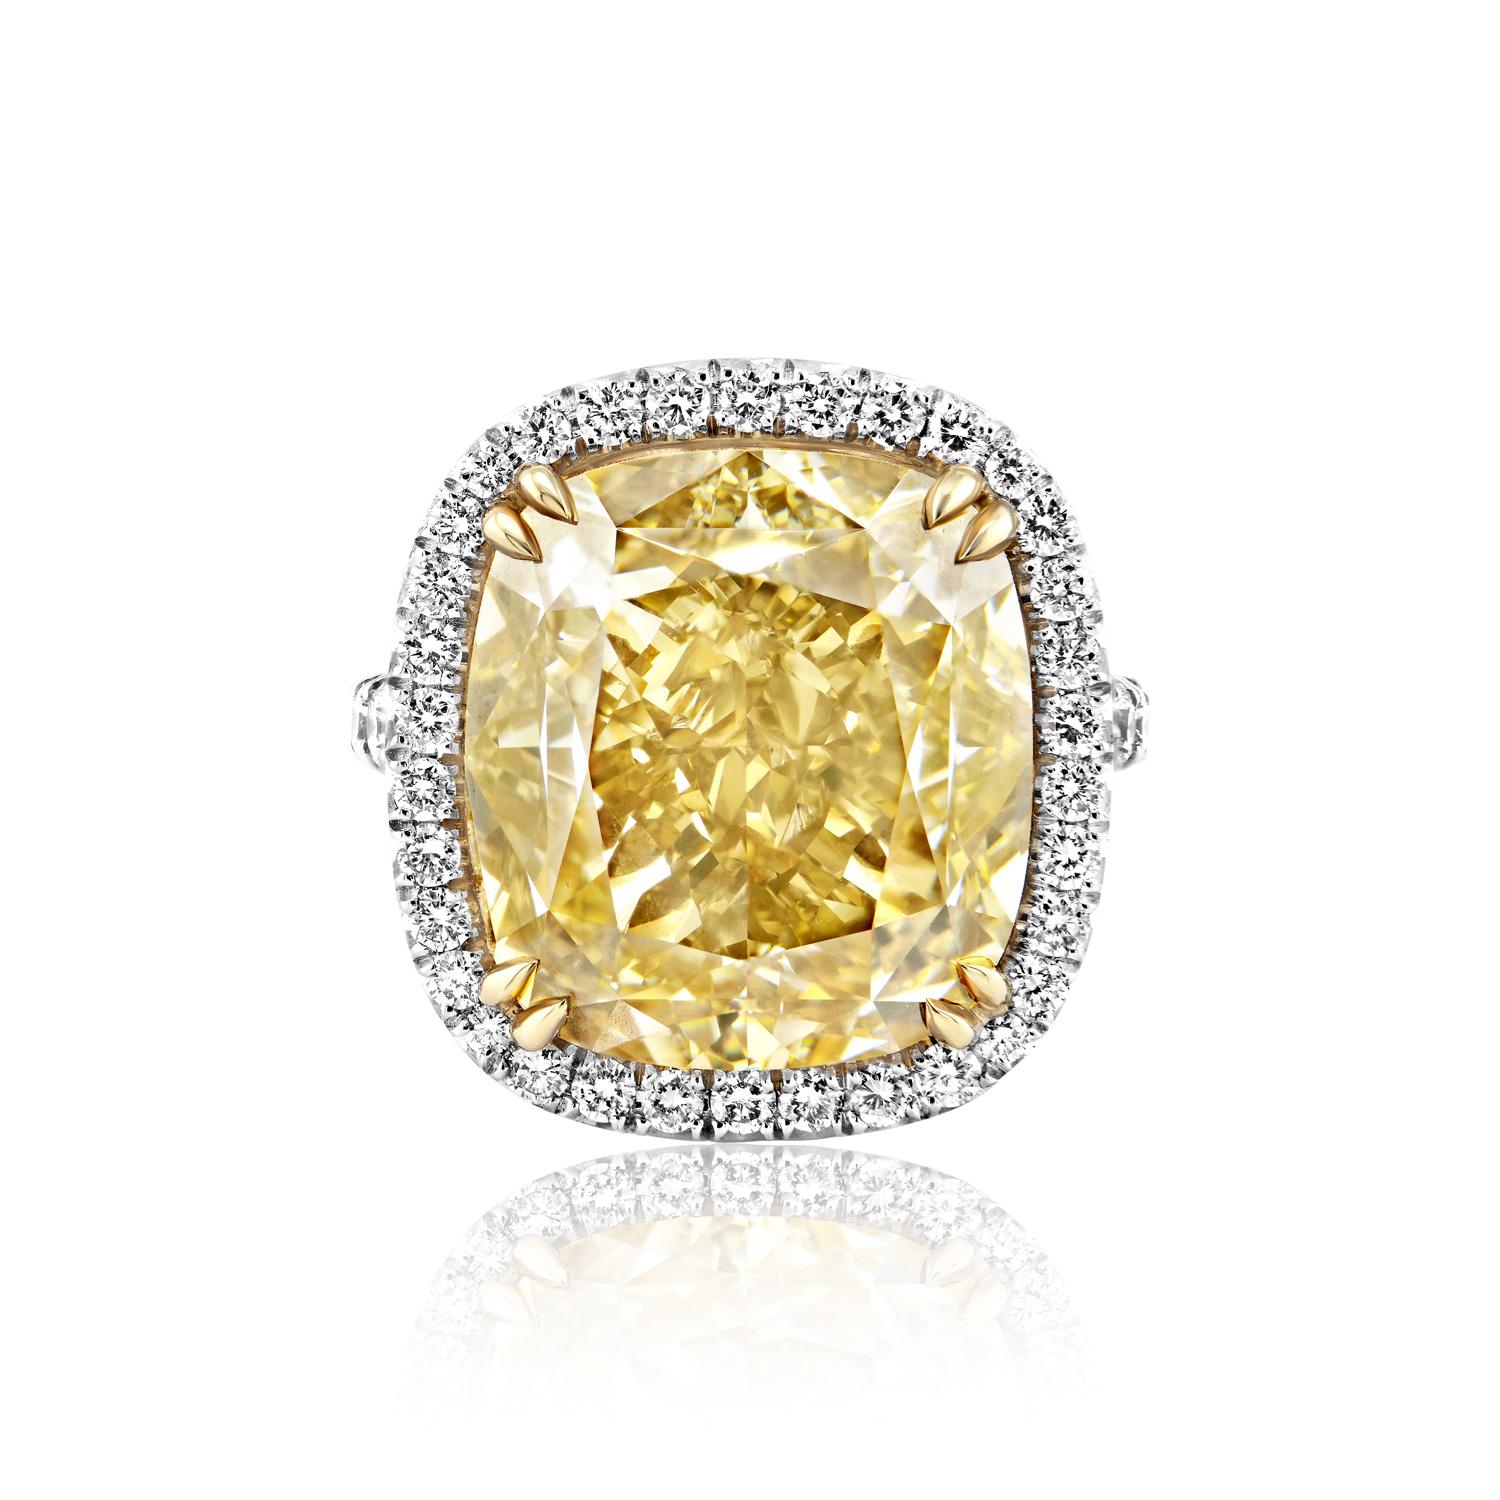 GIA Certified

Center Diamond:

Carat Weight: 20.03 Carats
Color : Fancy Brownish Greenish Yellow
Clarity: SI1
Style: Cushion Cut

Ring:
Settings: 4 Double Claw Prong, Halo
Metal: Platinum & 18 Karat Yellow Gold
Style: Round Brilliant Cut
Carat